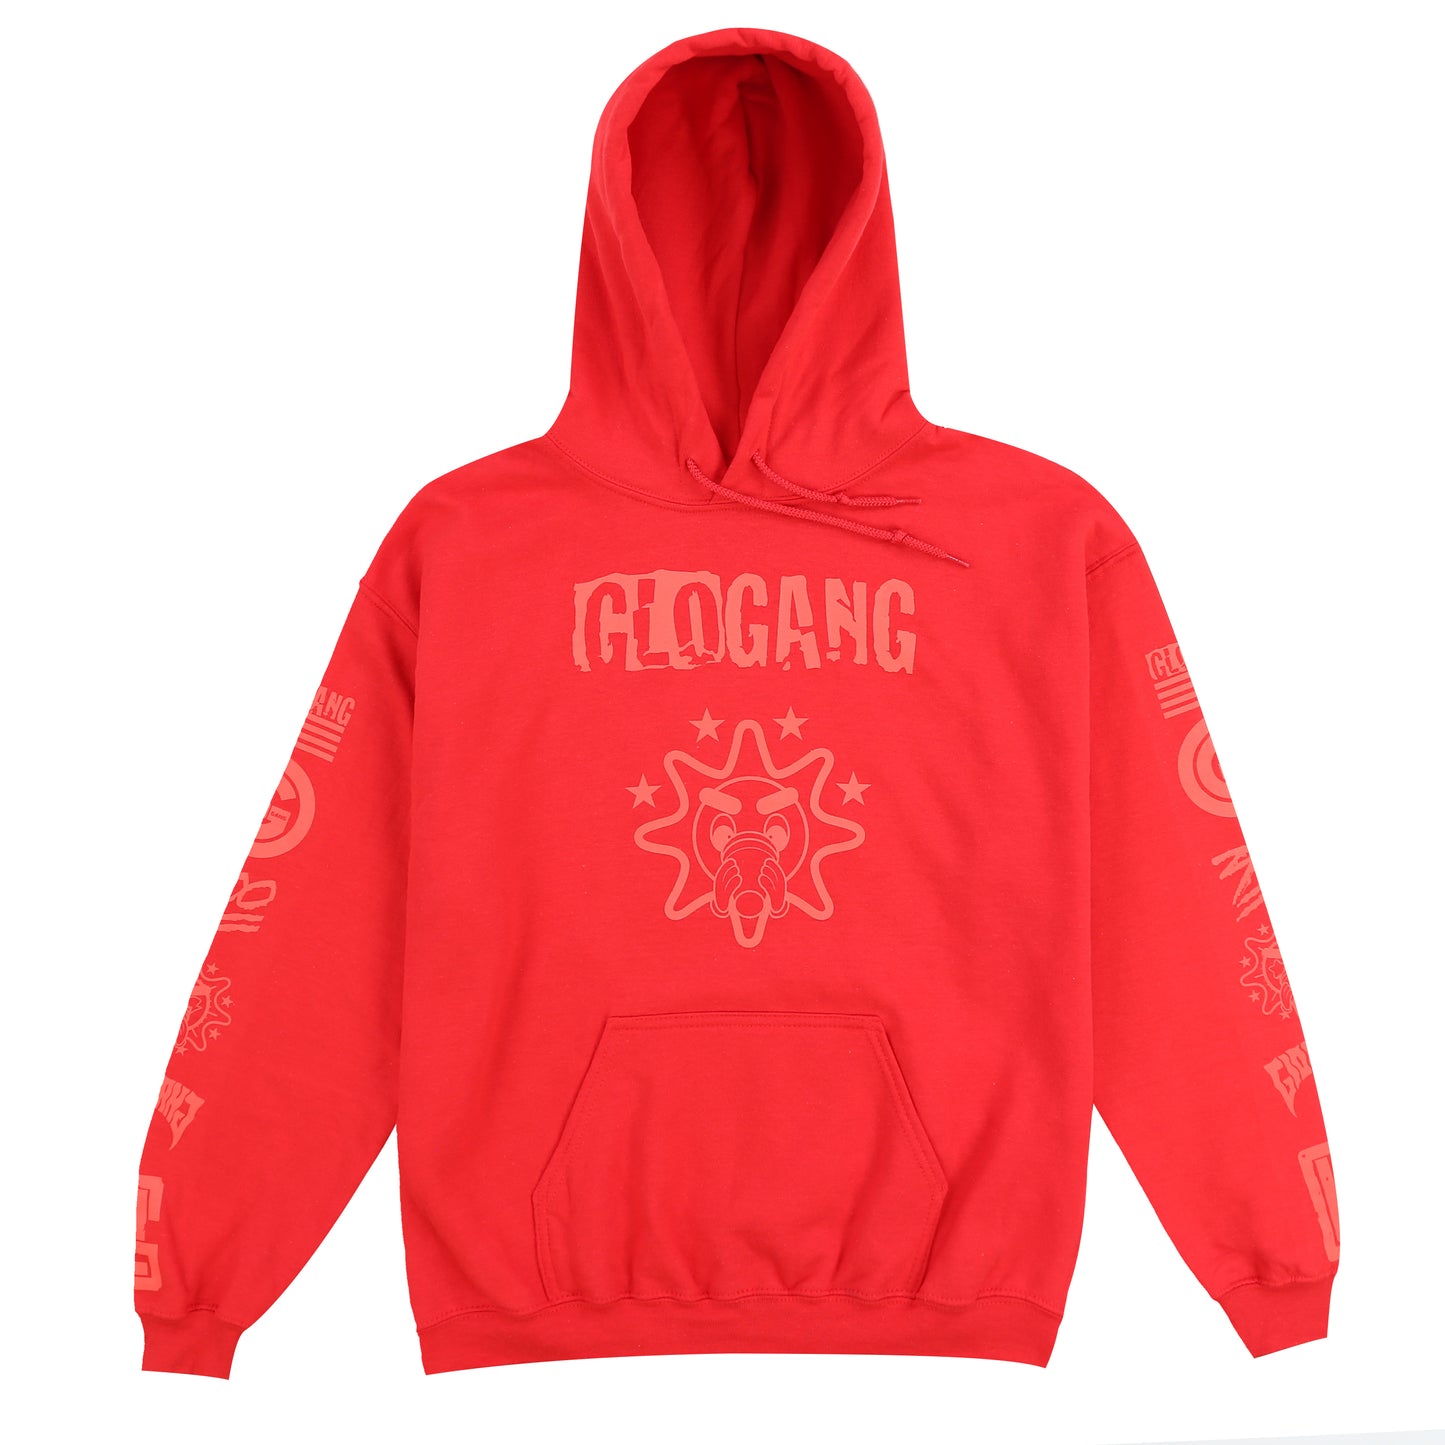 300 Gloyalty Hoodie (Red/Electric Red)